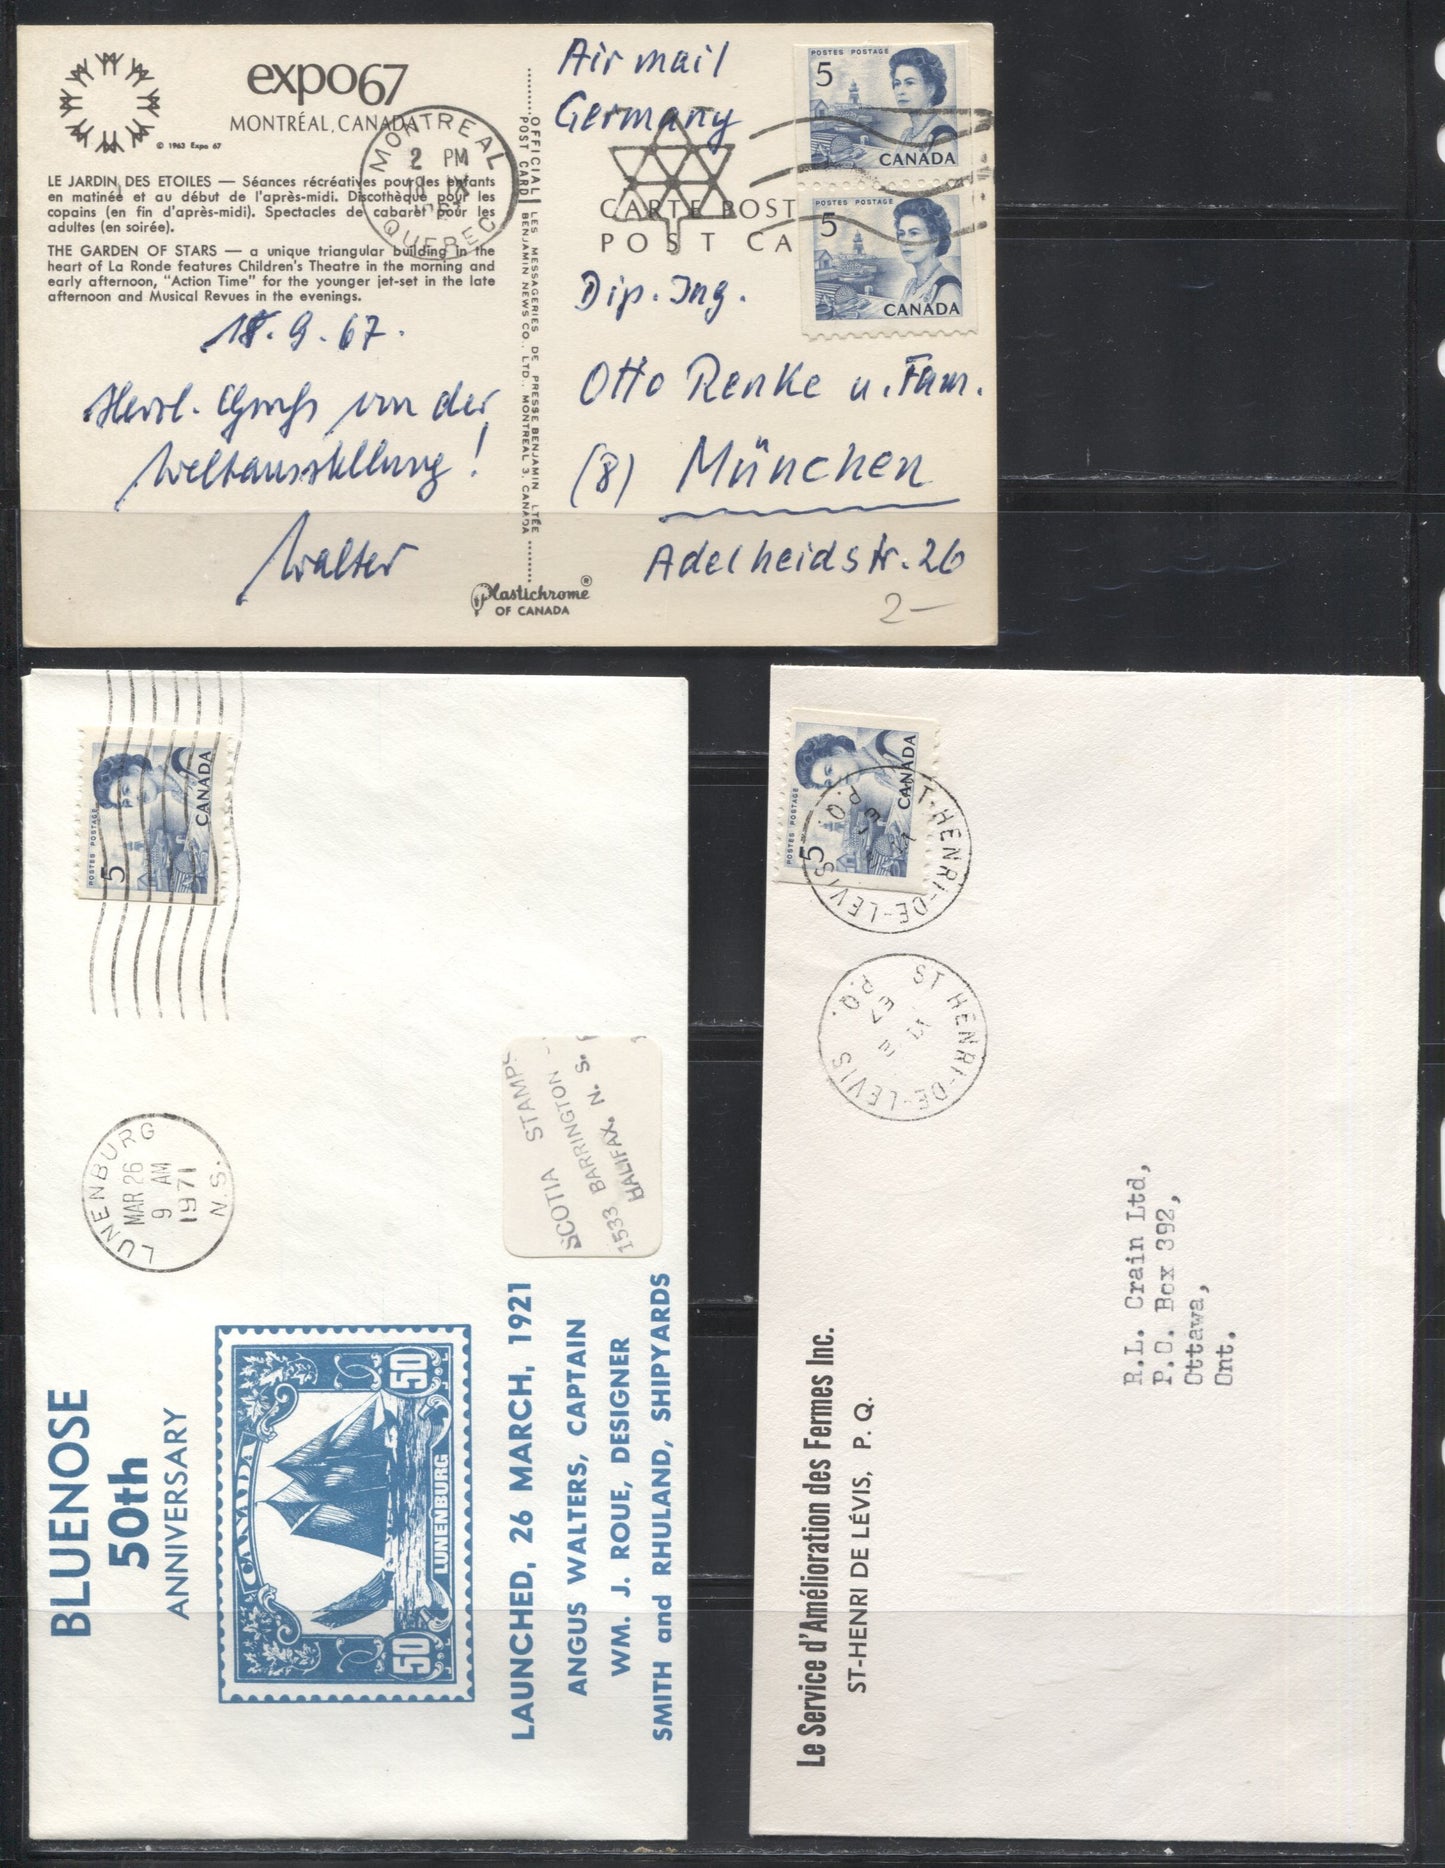 Lot 275 Canada #468 5c Deep Blue Atlantic Fishing Village, 1967-1973 Centennial Issue, Usages of the DF Coil Stamp on 2 Covers and One Postcard